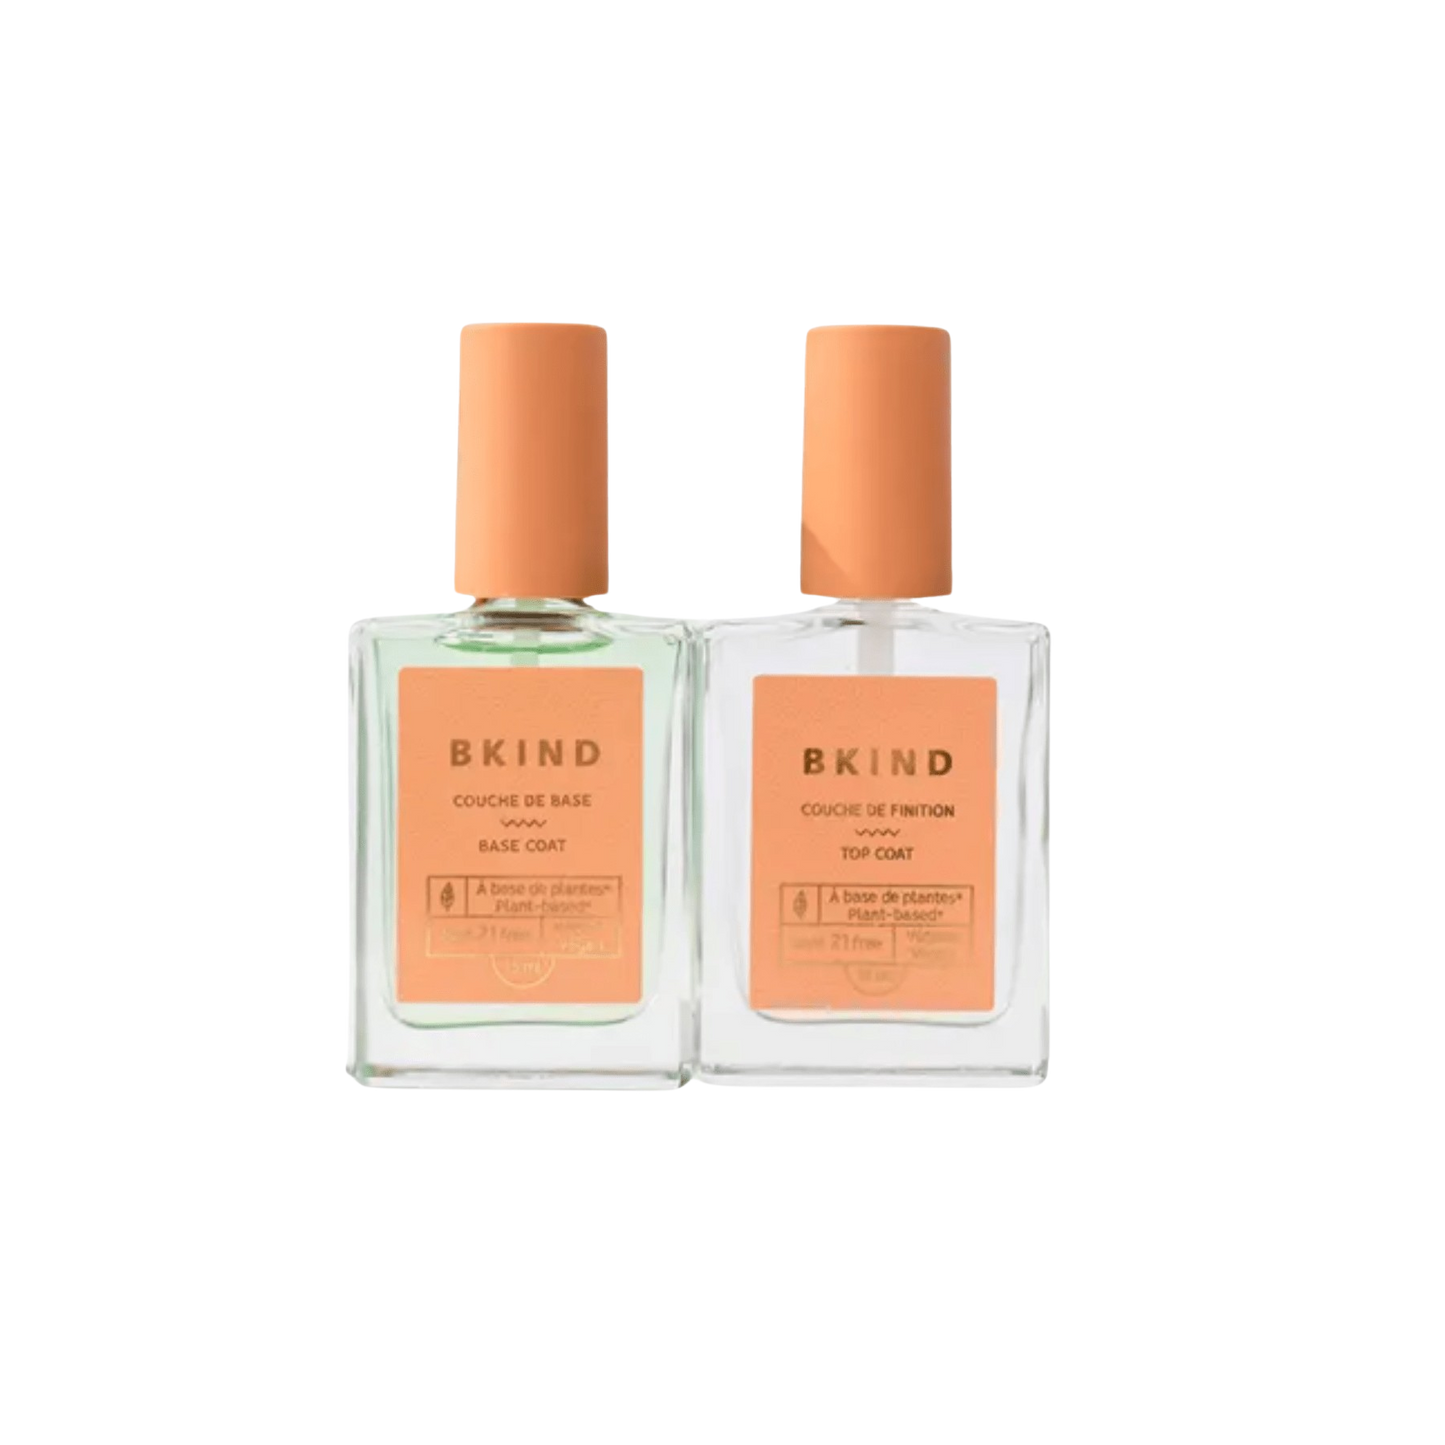 BKIND Manicure Pack - Nail Polish Duo - Base and Top Coat